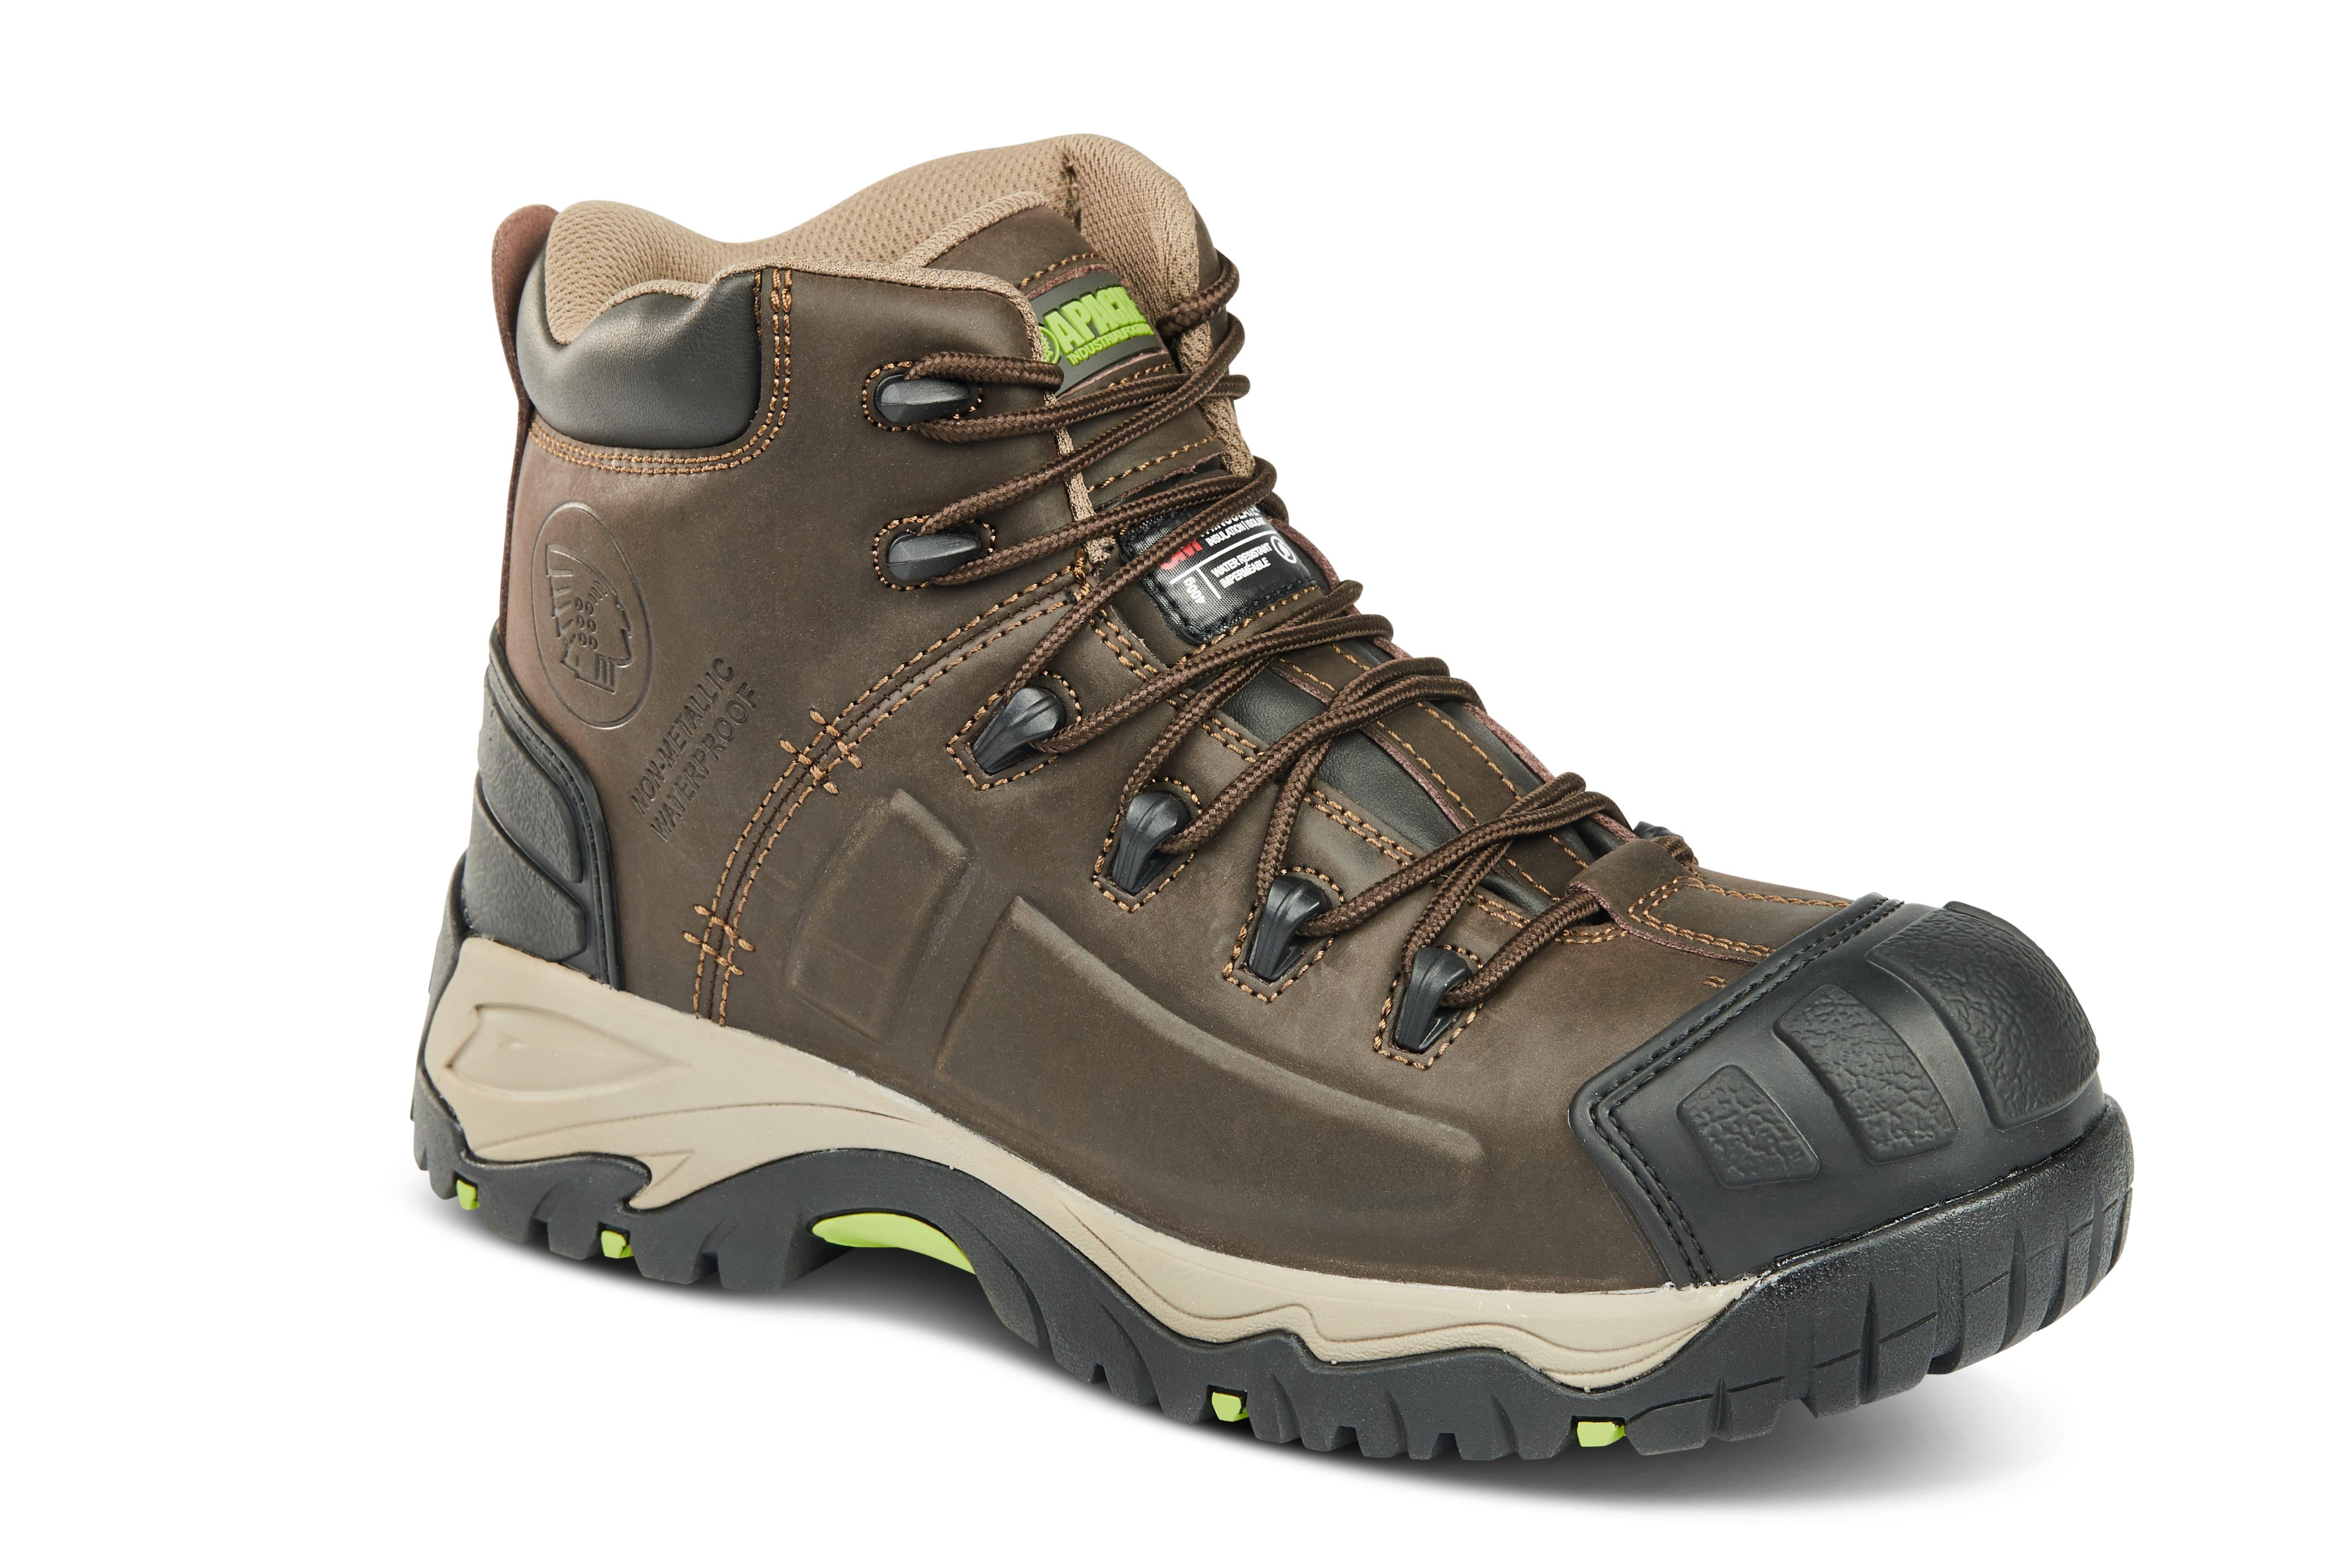 Apache Neptune S3 brown waterproof composite toe/midsole work safety boots